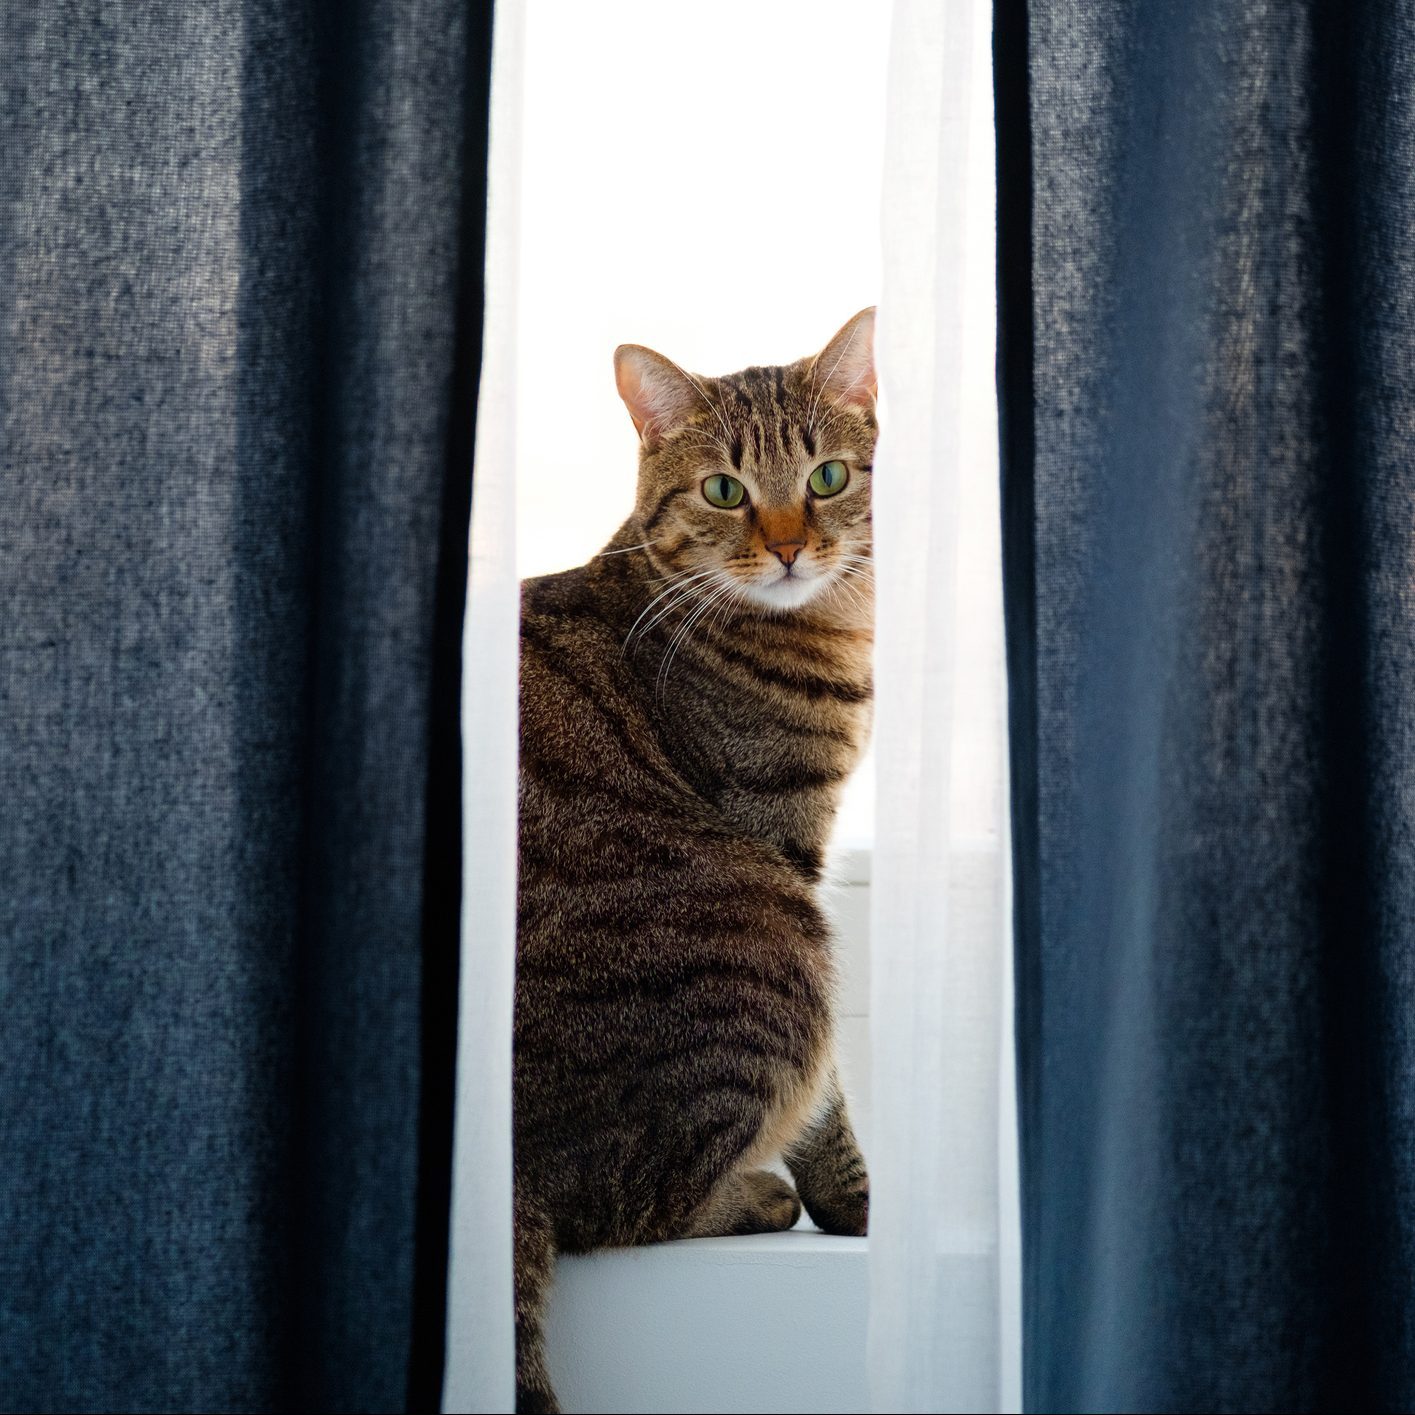 A domestic gray striped cat sits behind a DIY curtain for hiding the litter box